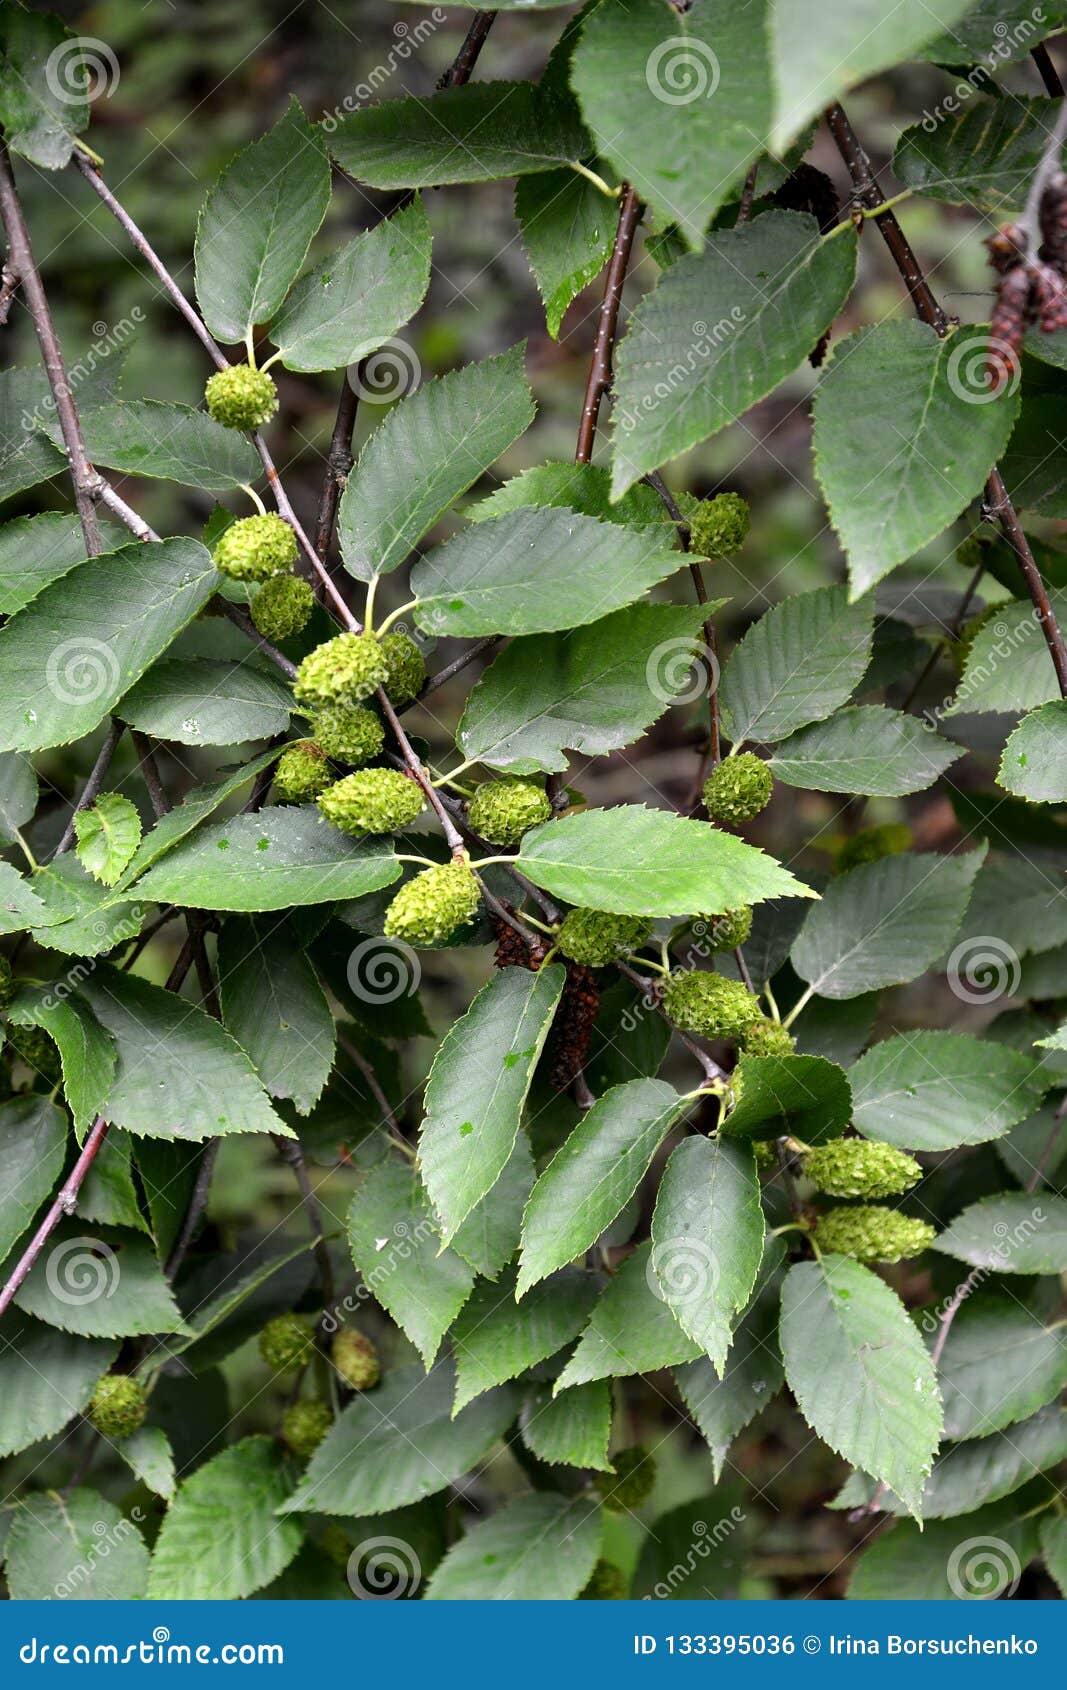 birch cherry betula lenta l.. branches with green fruits and leaves